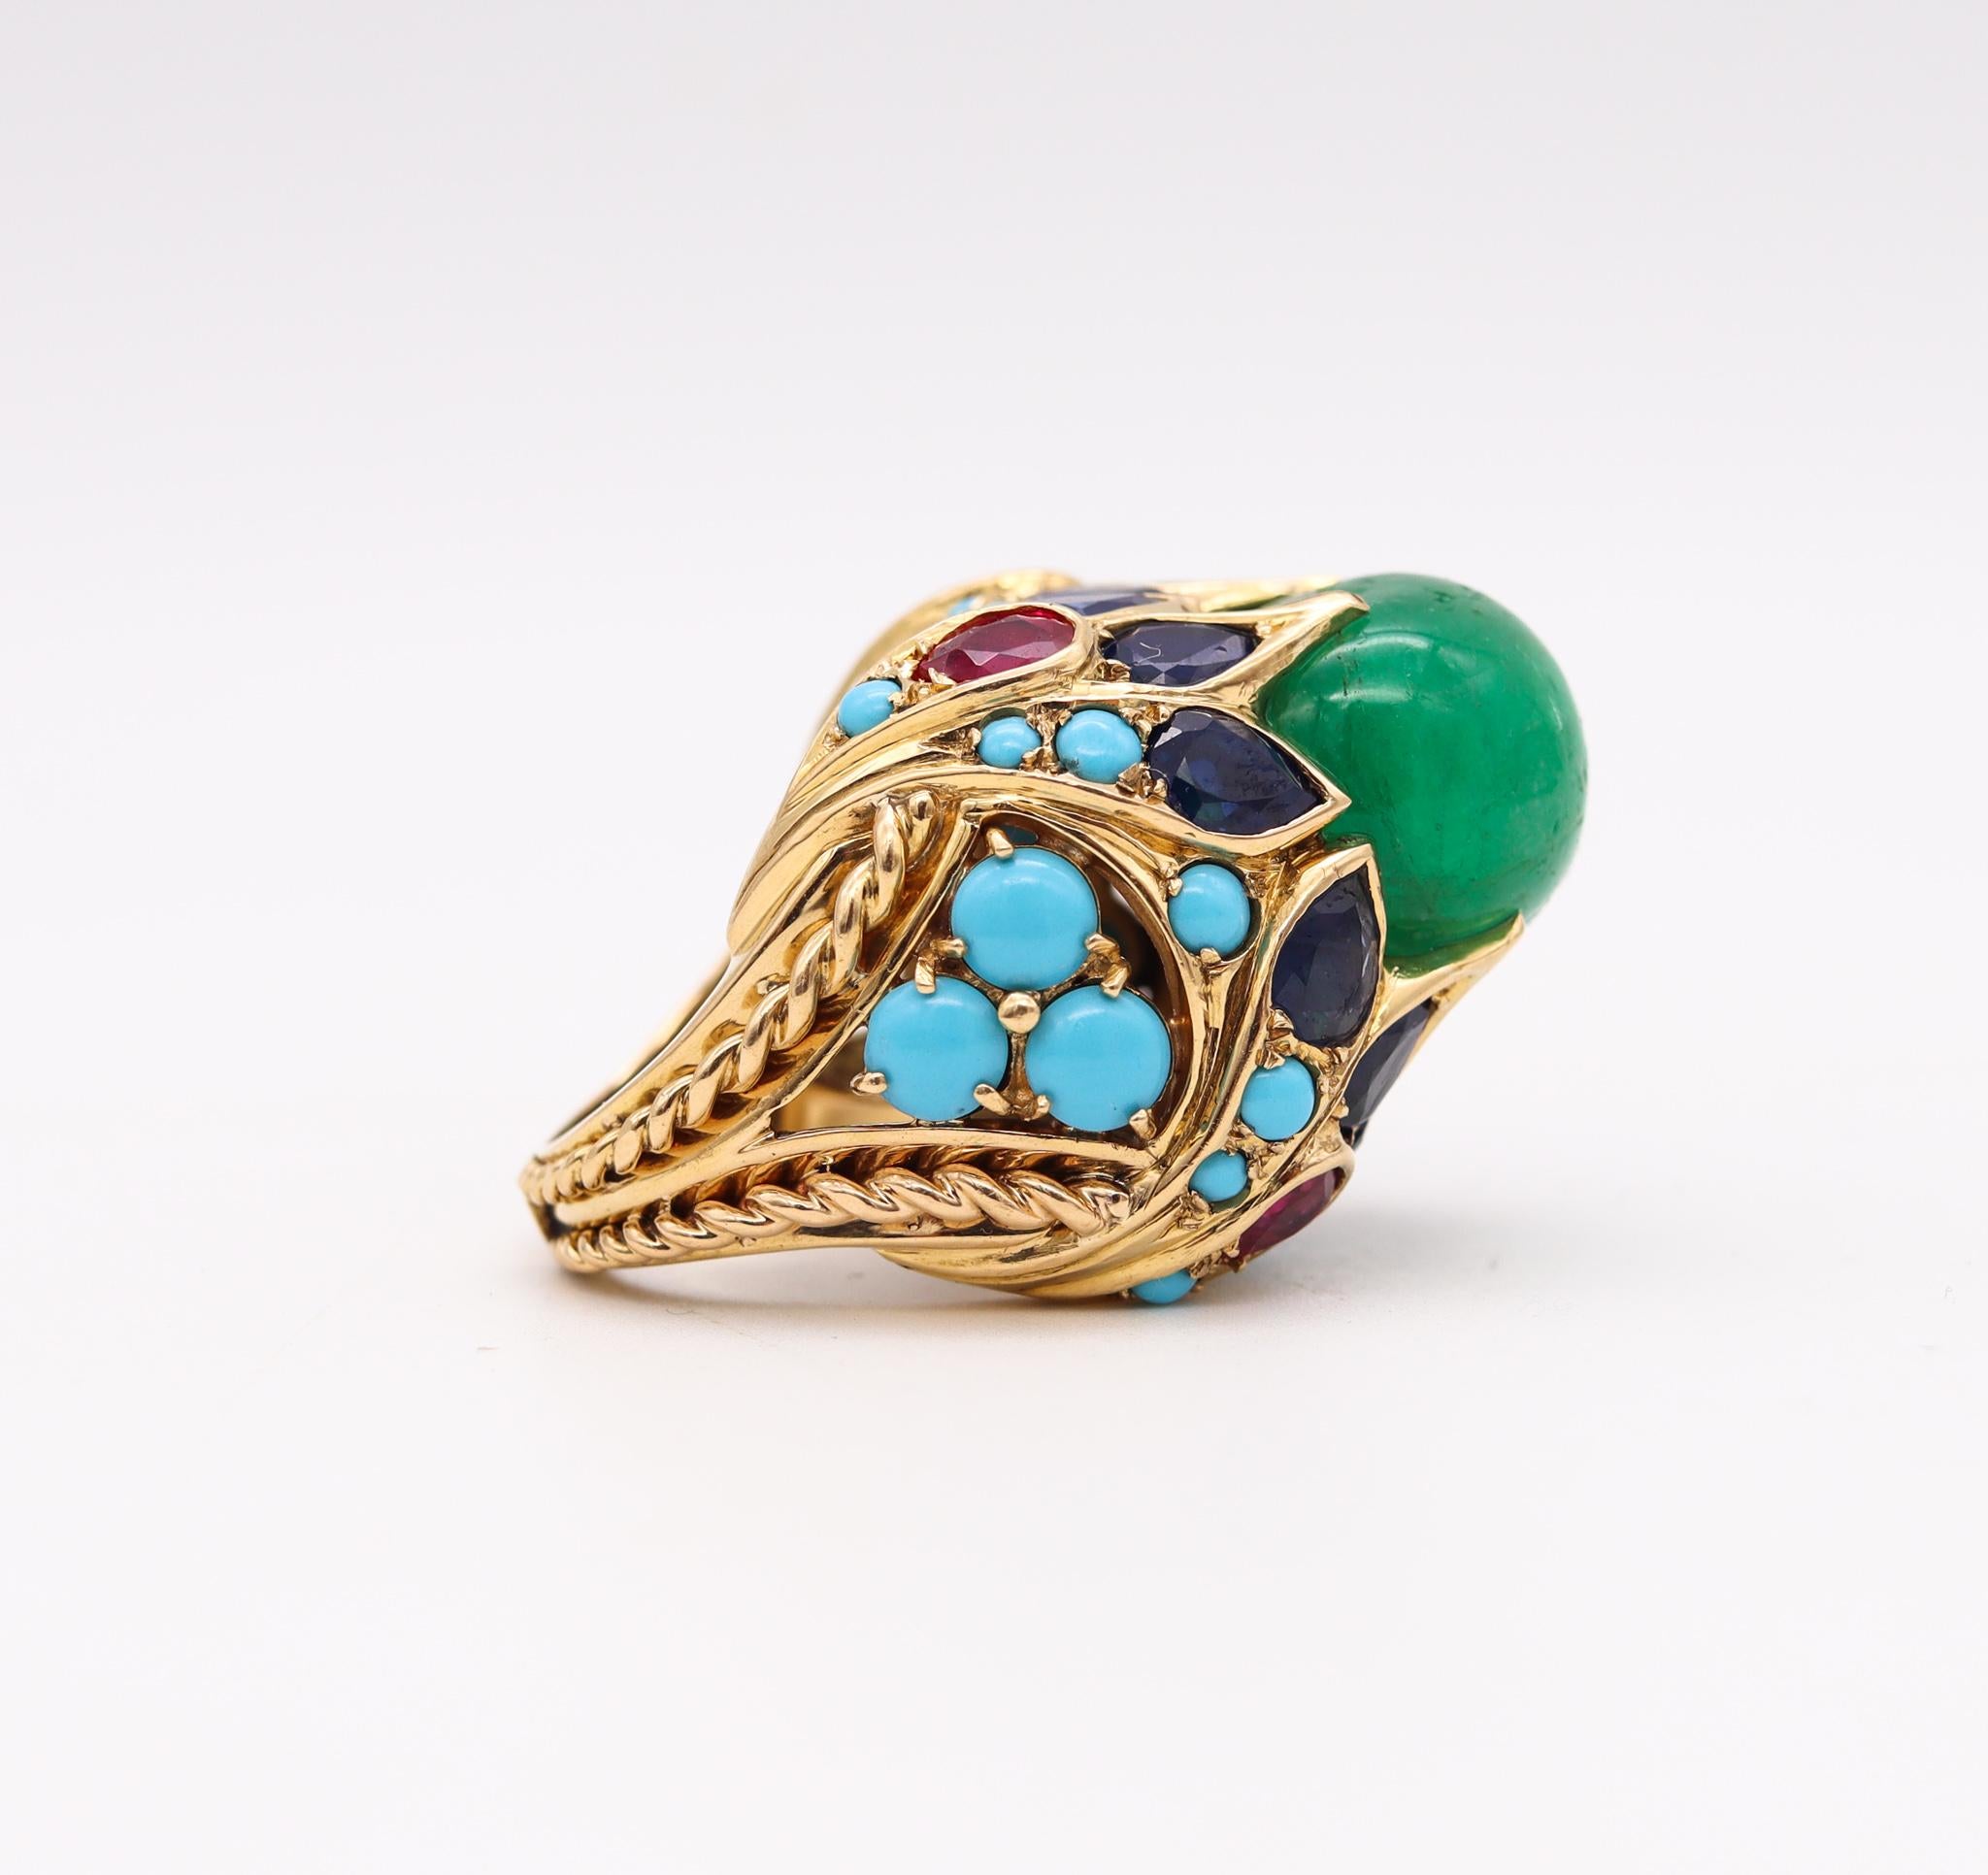 Cabochon Mid Century 1960 Mughal Tutti Frutti Cocktail Ring 18Kt Gold with 33.68 Cts Gems